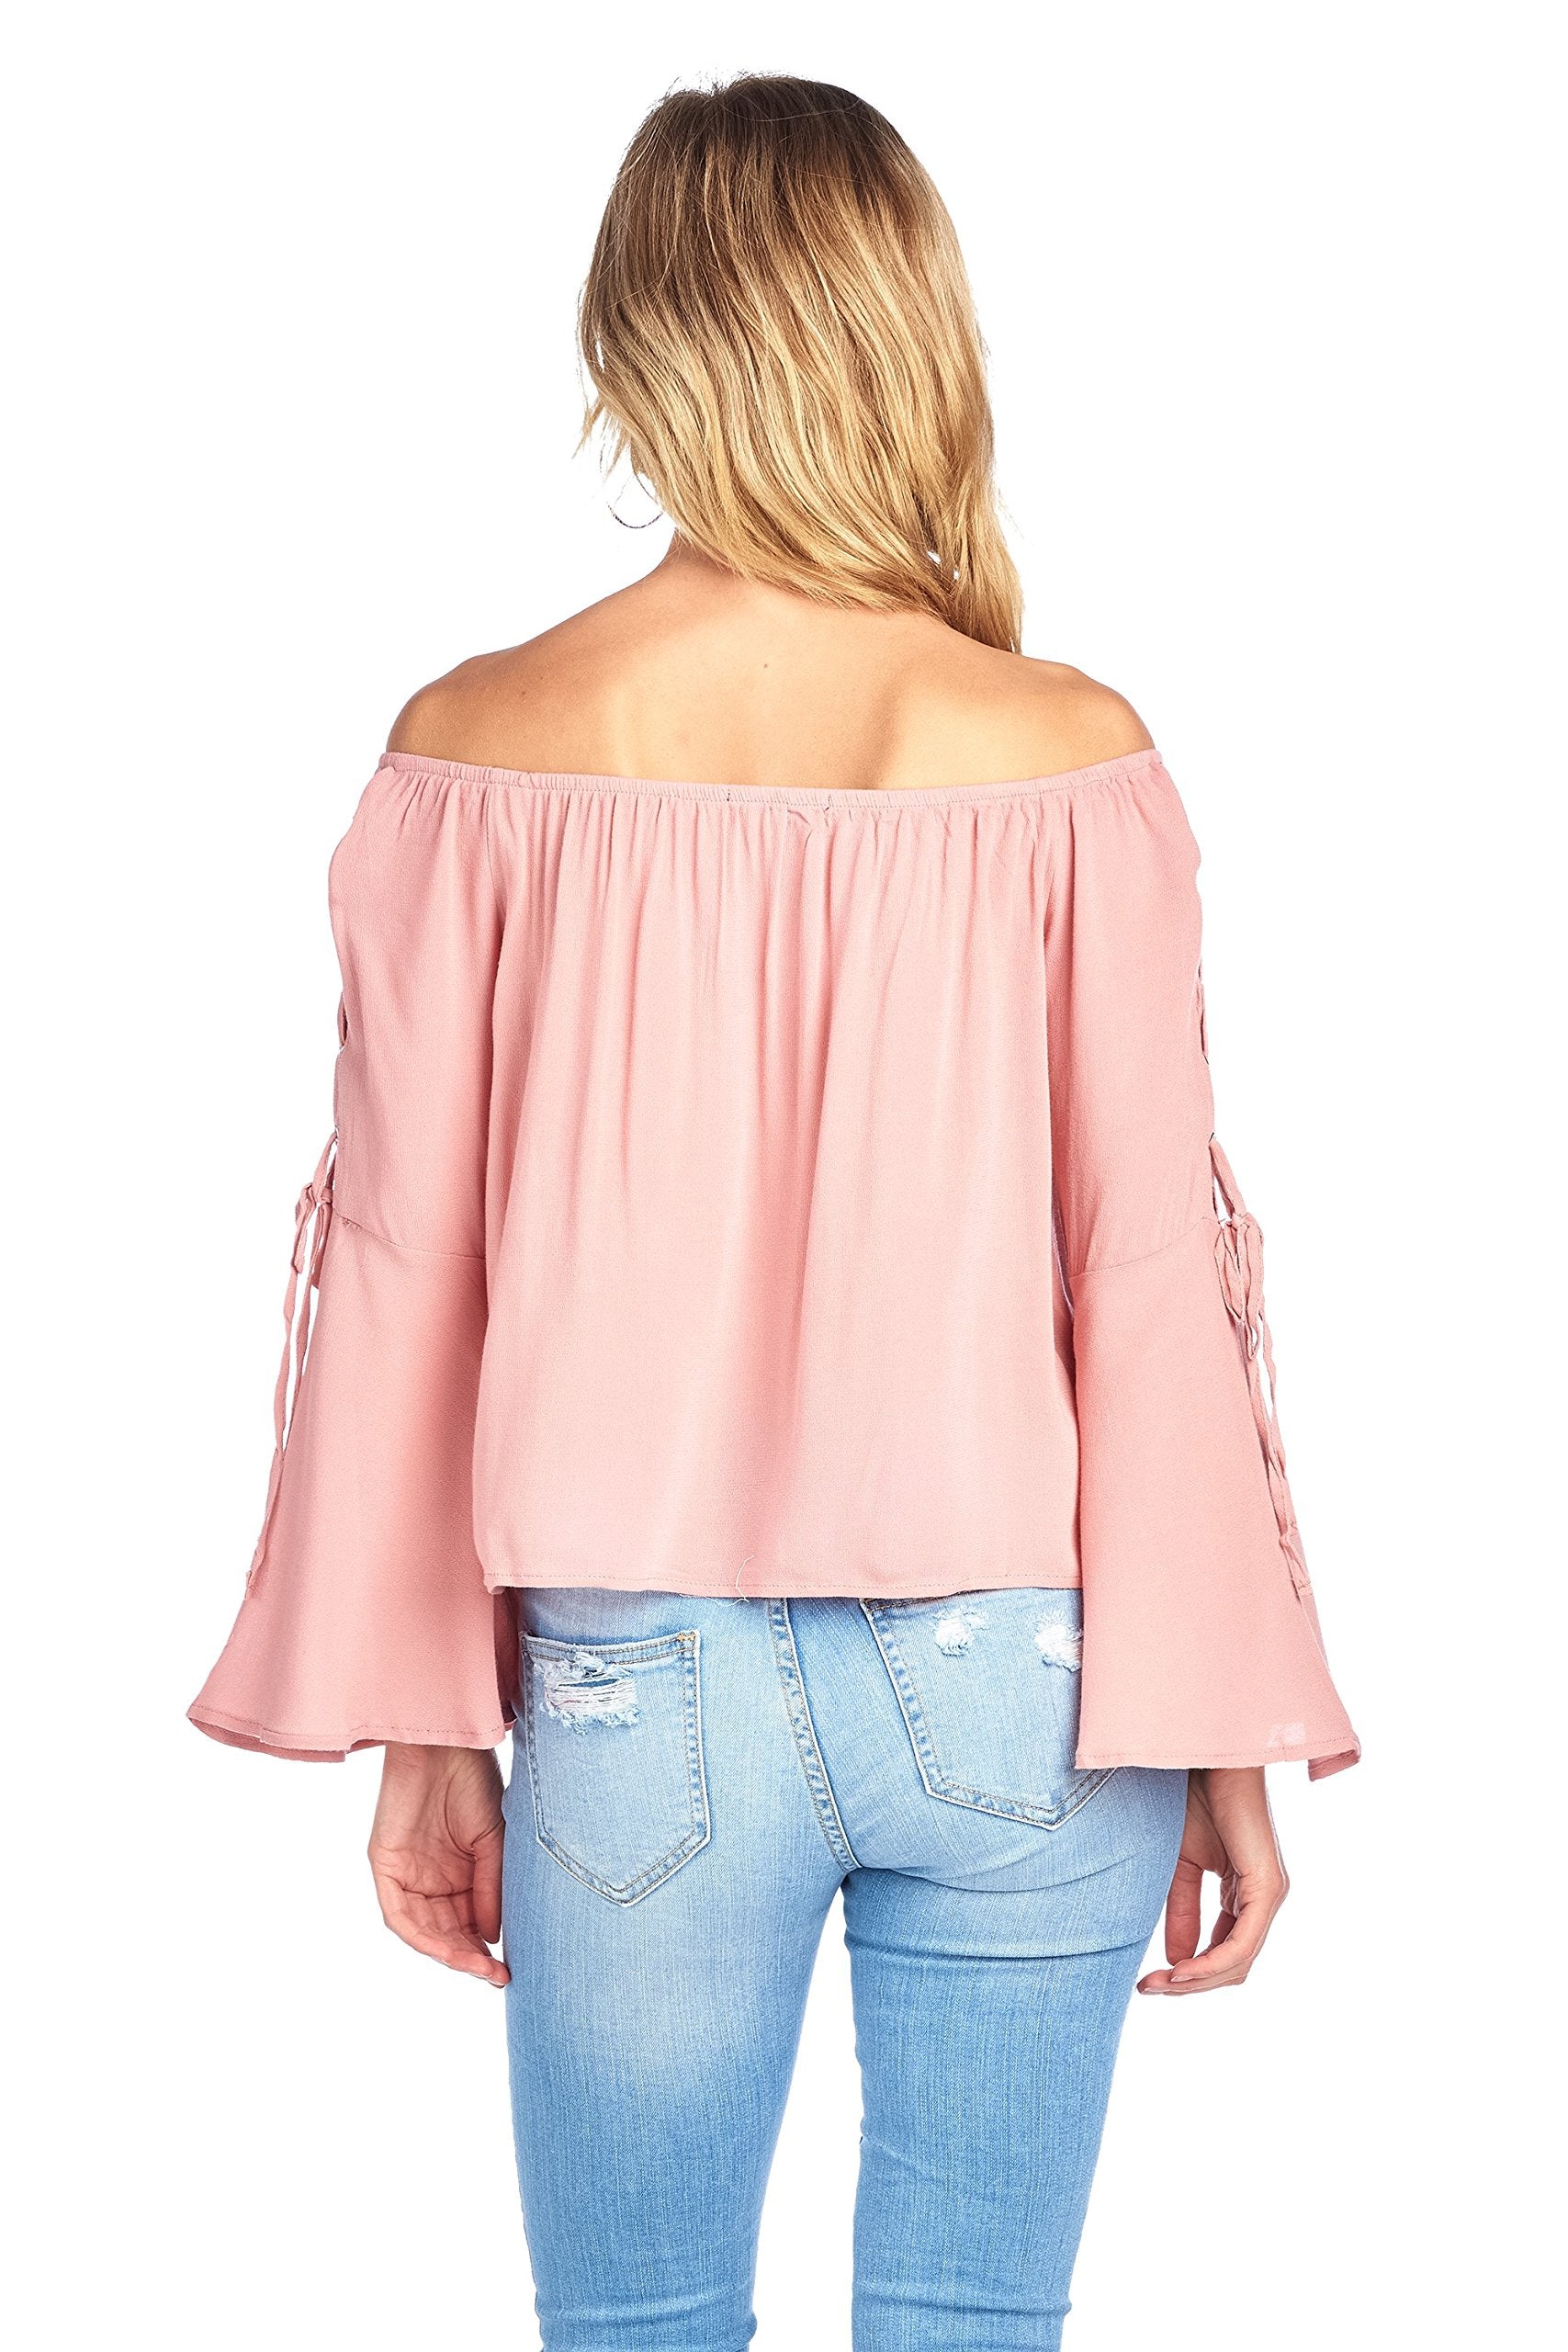 Elasticized Off Shoulder Long Trumpet Lace-Up Self-Tie Cuff Sleeve Flowy Top